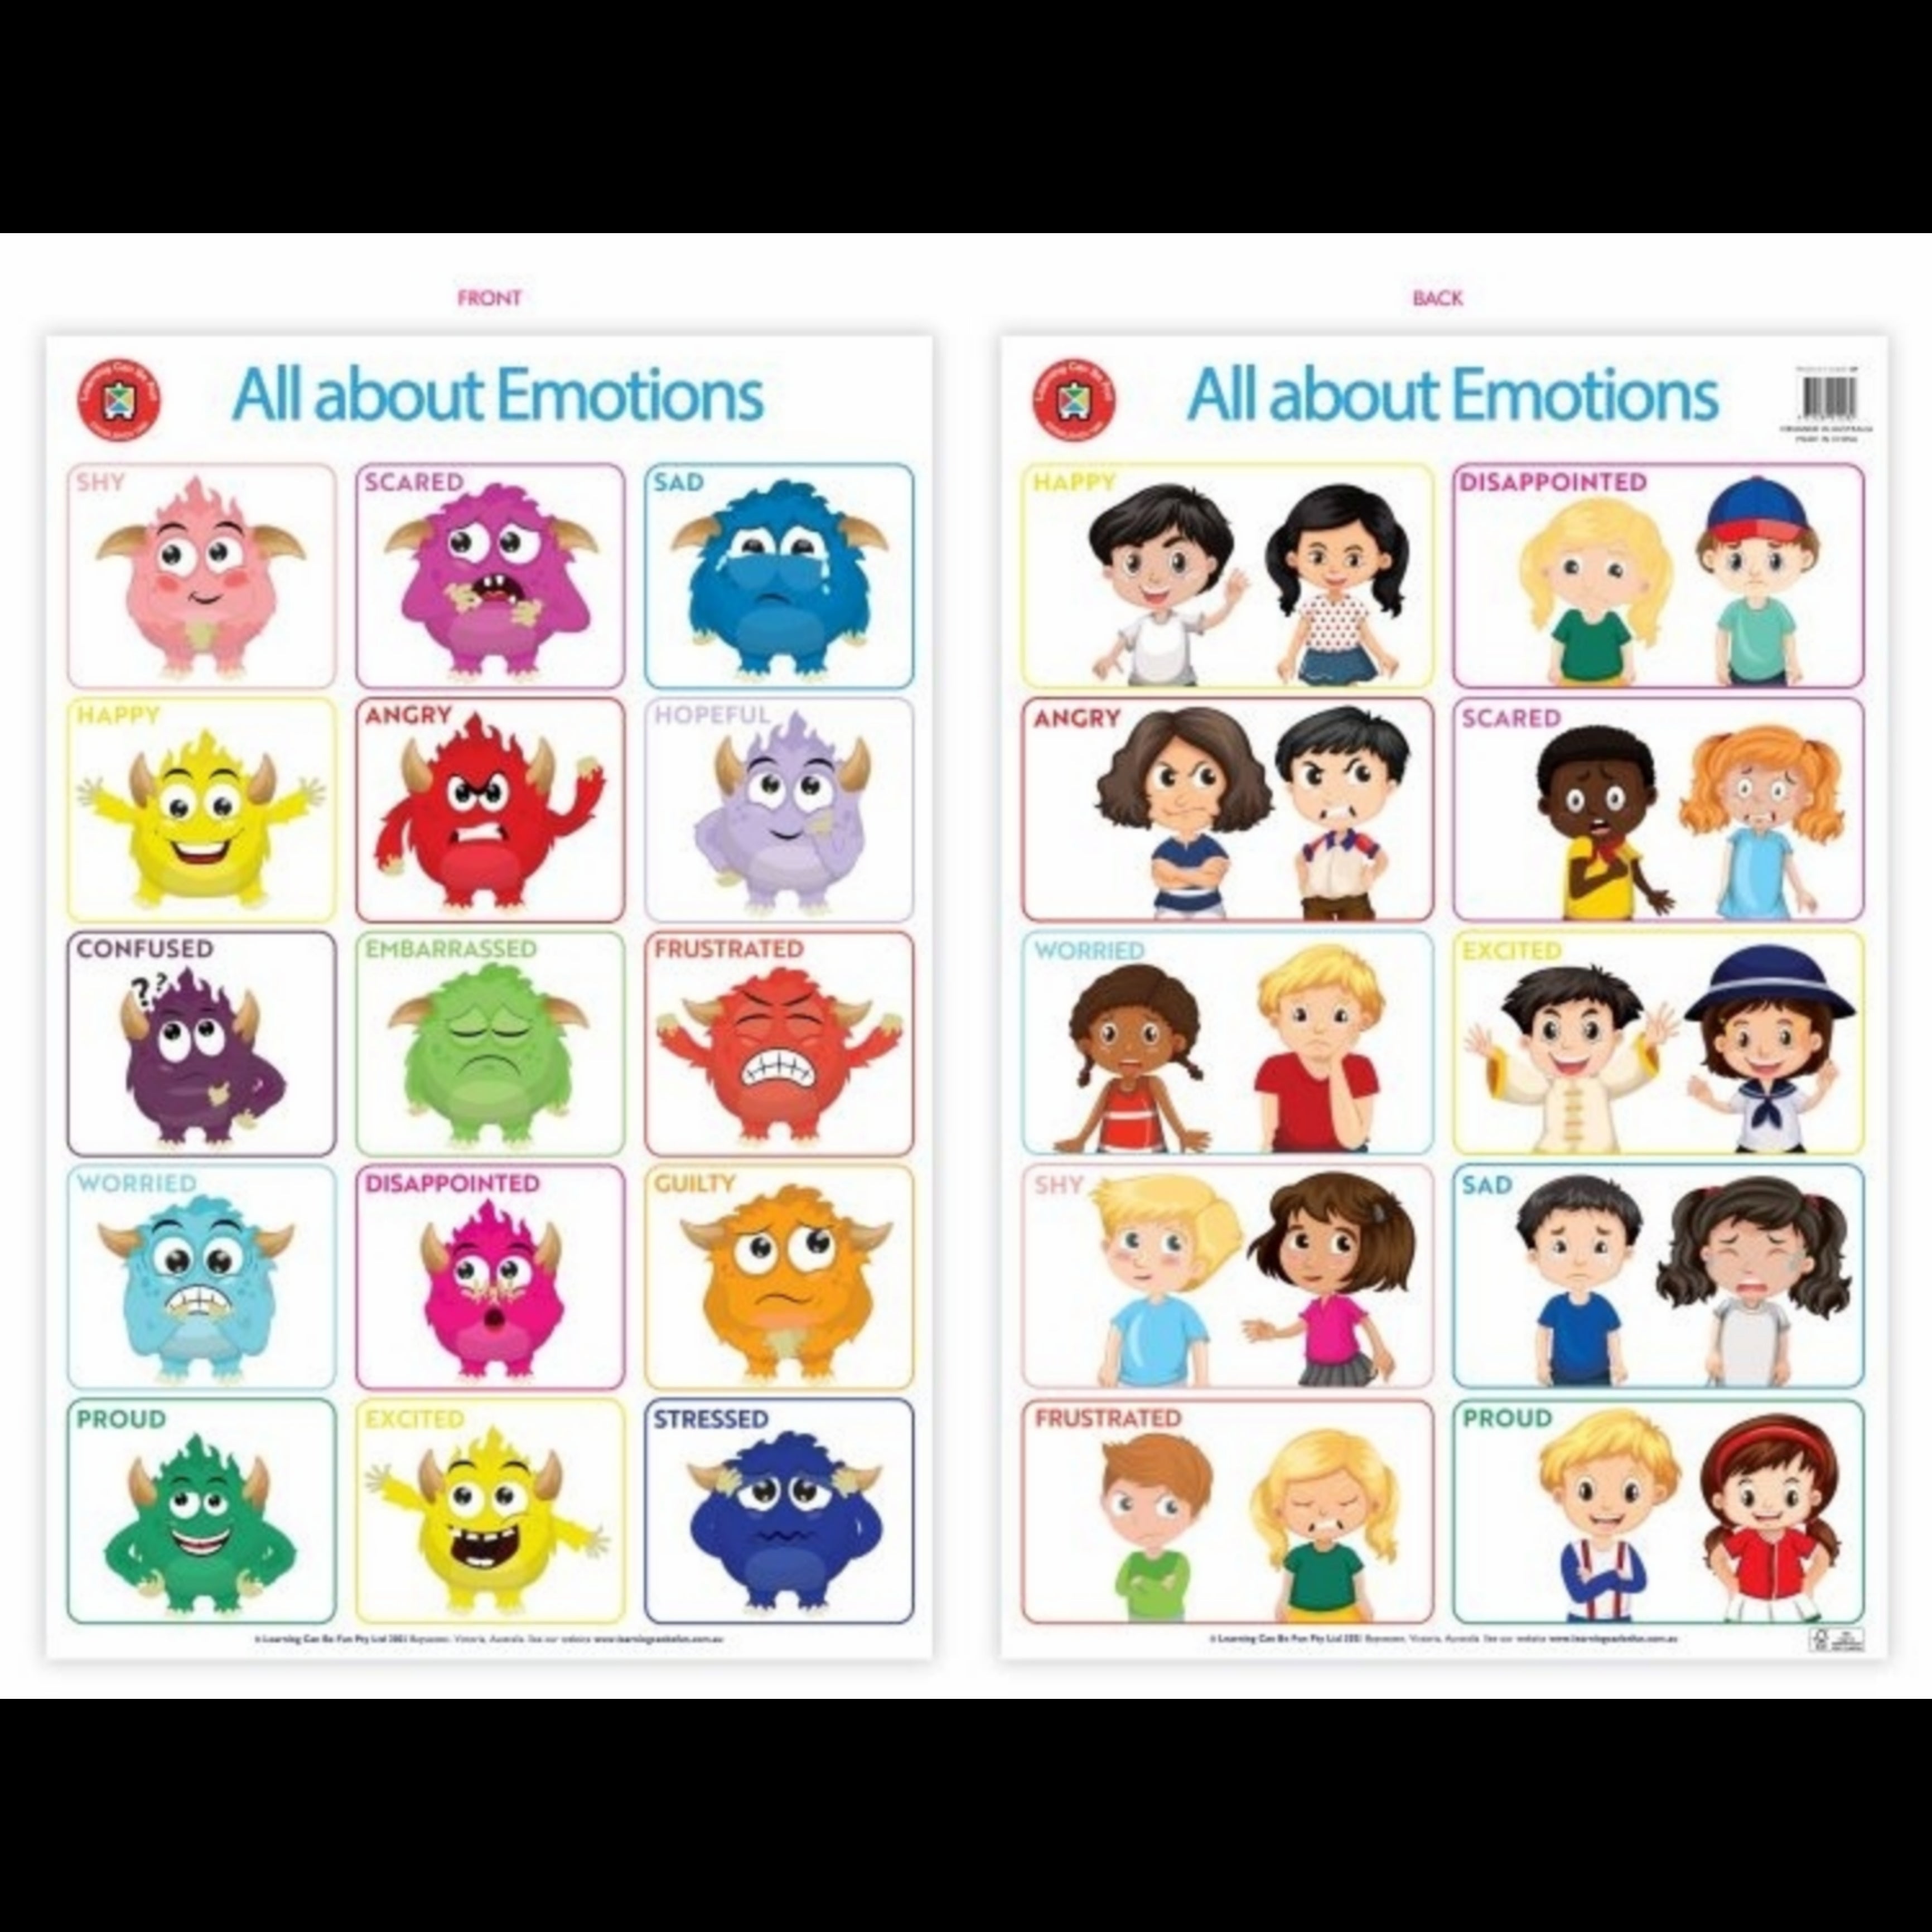 All about Emotions Giant double sided Poster